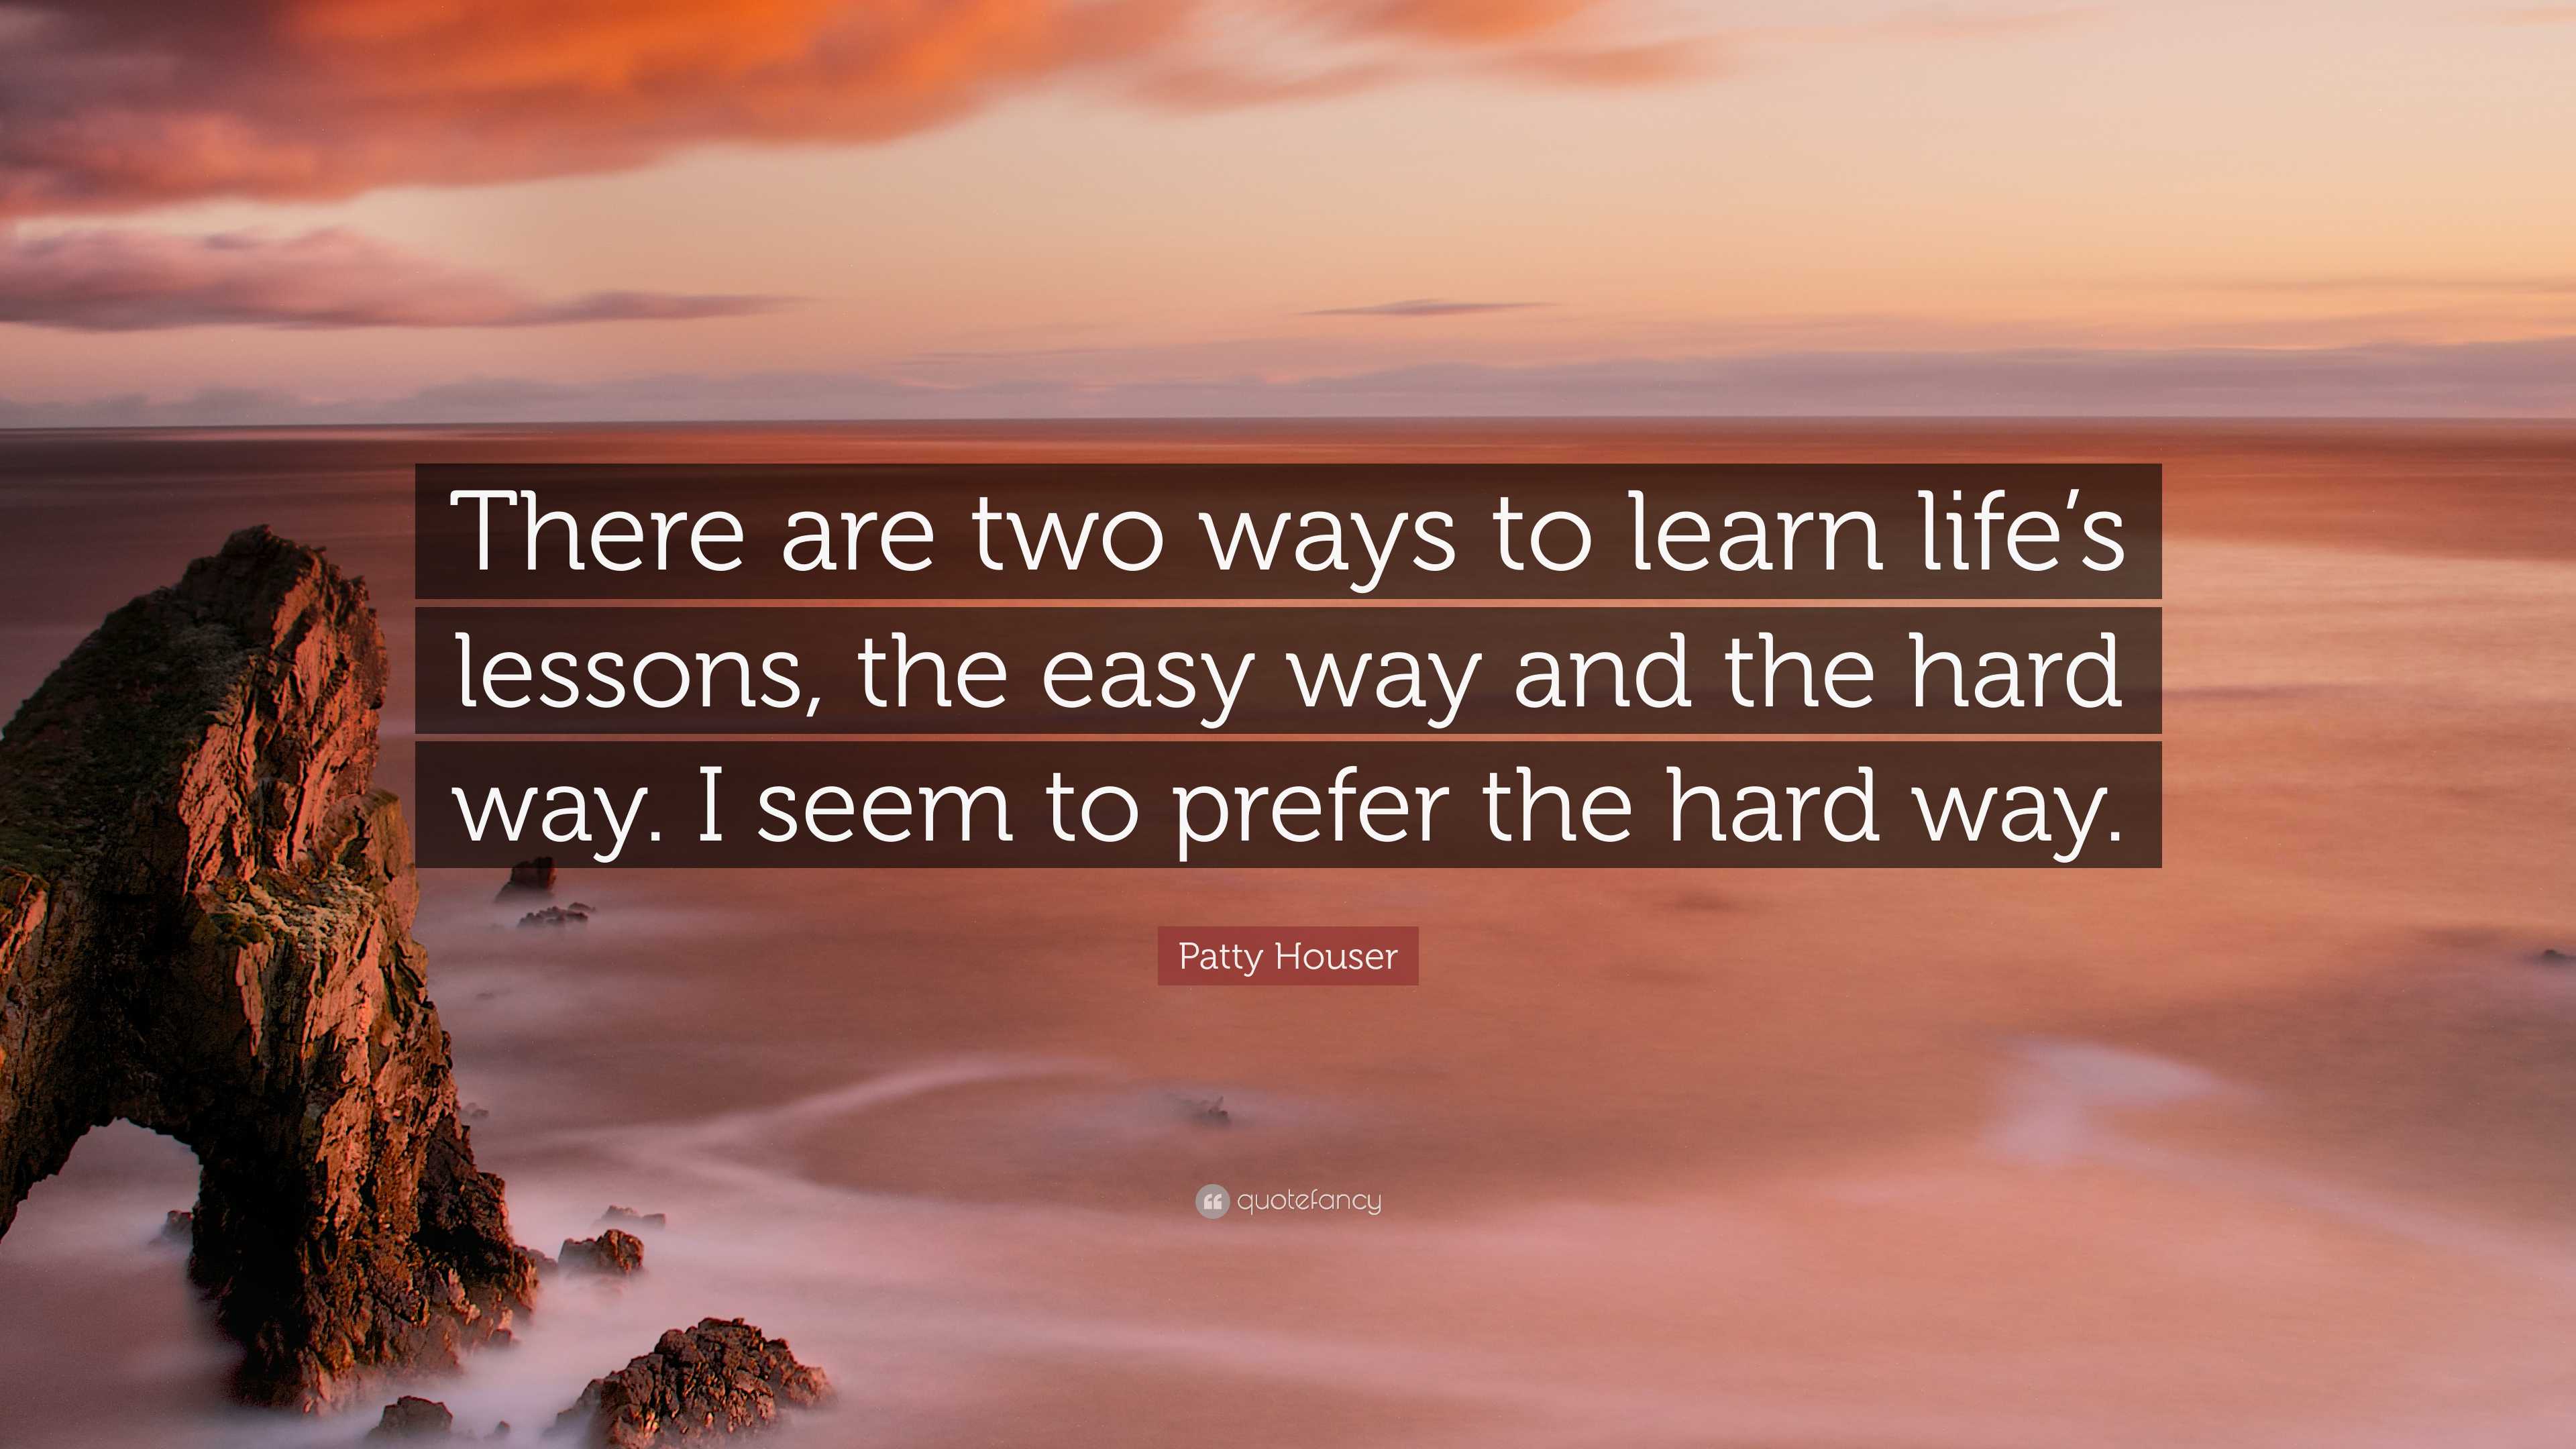 Patty Houser Quote: “There are two ways to learn life's lessons, the easy  way and the hard way. I seem to prefer the hard way.”